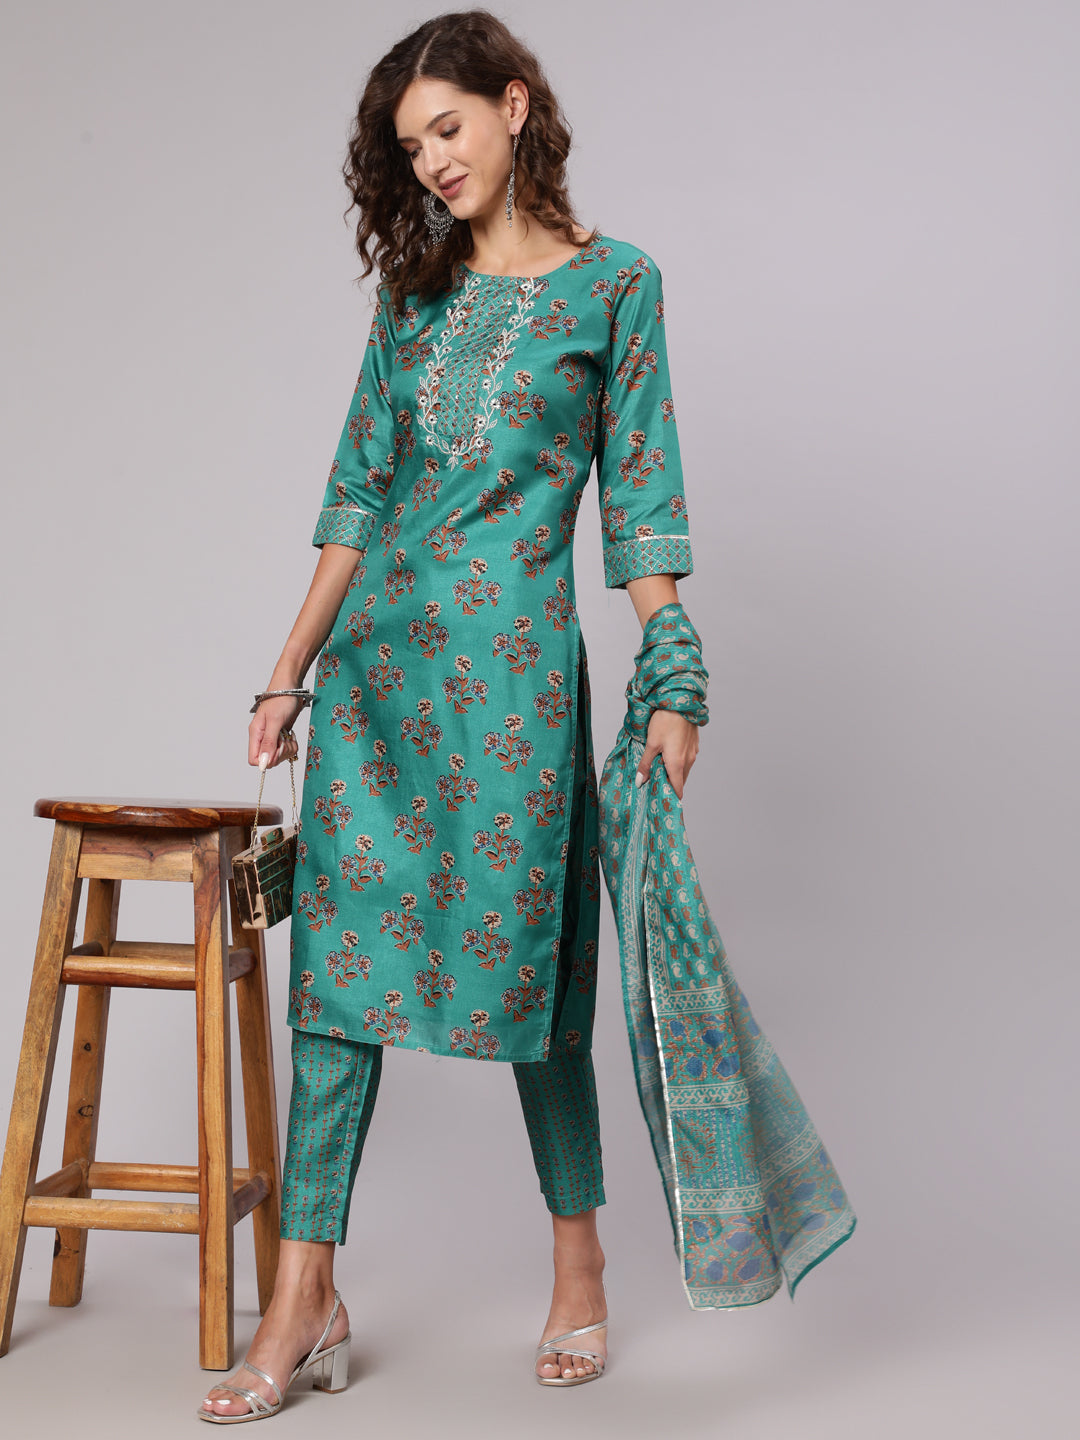 Sea Green Tussar Silk Kurta Has Round Neck, Zari Work In Front Yoke , Three Fourth Sleeves Has Gota Lace, Side Slit, Straight Hem, Cotton Mulmul Lining Attached To It, Printed Silk Blend Palazzo Has Both Side Pocket And Partially Elastic At Waist Ans Has Cotton Mulmul Lining Attached To It., Supernet Printed Dupatta Has Gota Lace All Over The Dupatta.